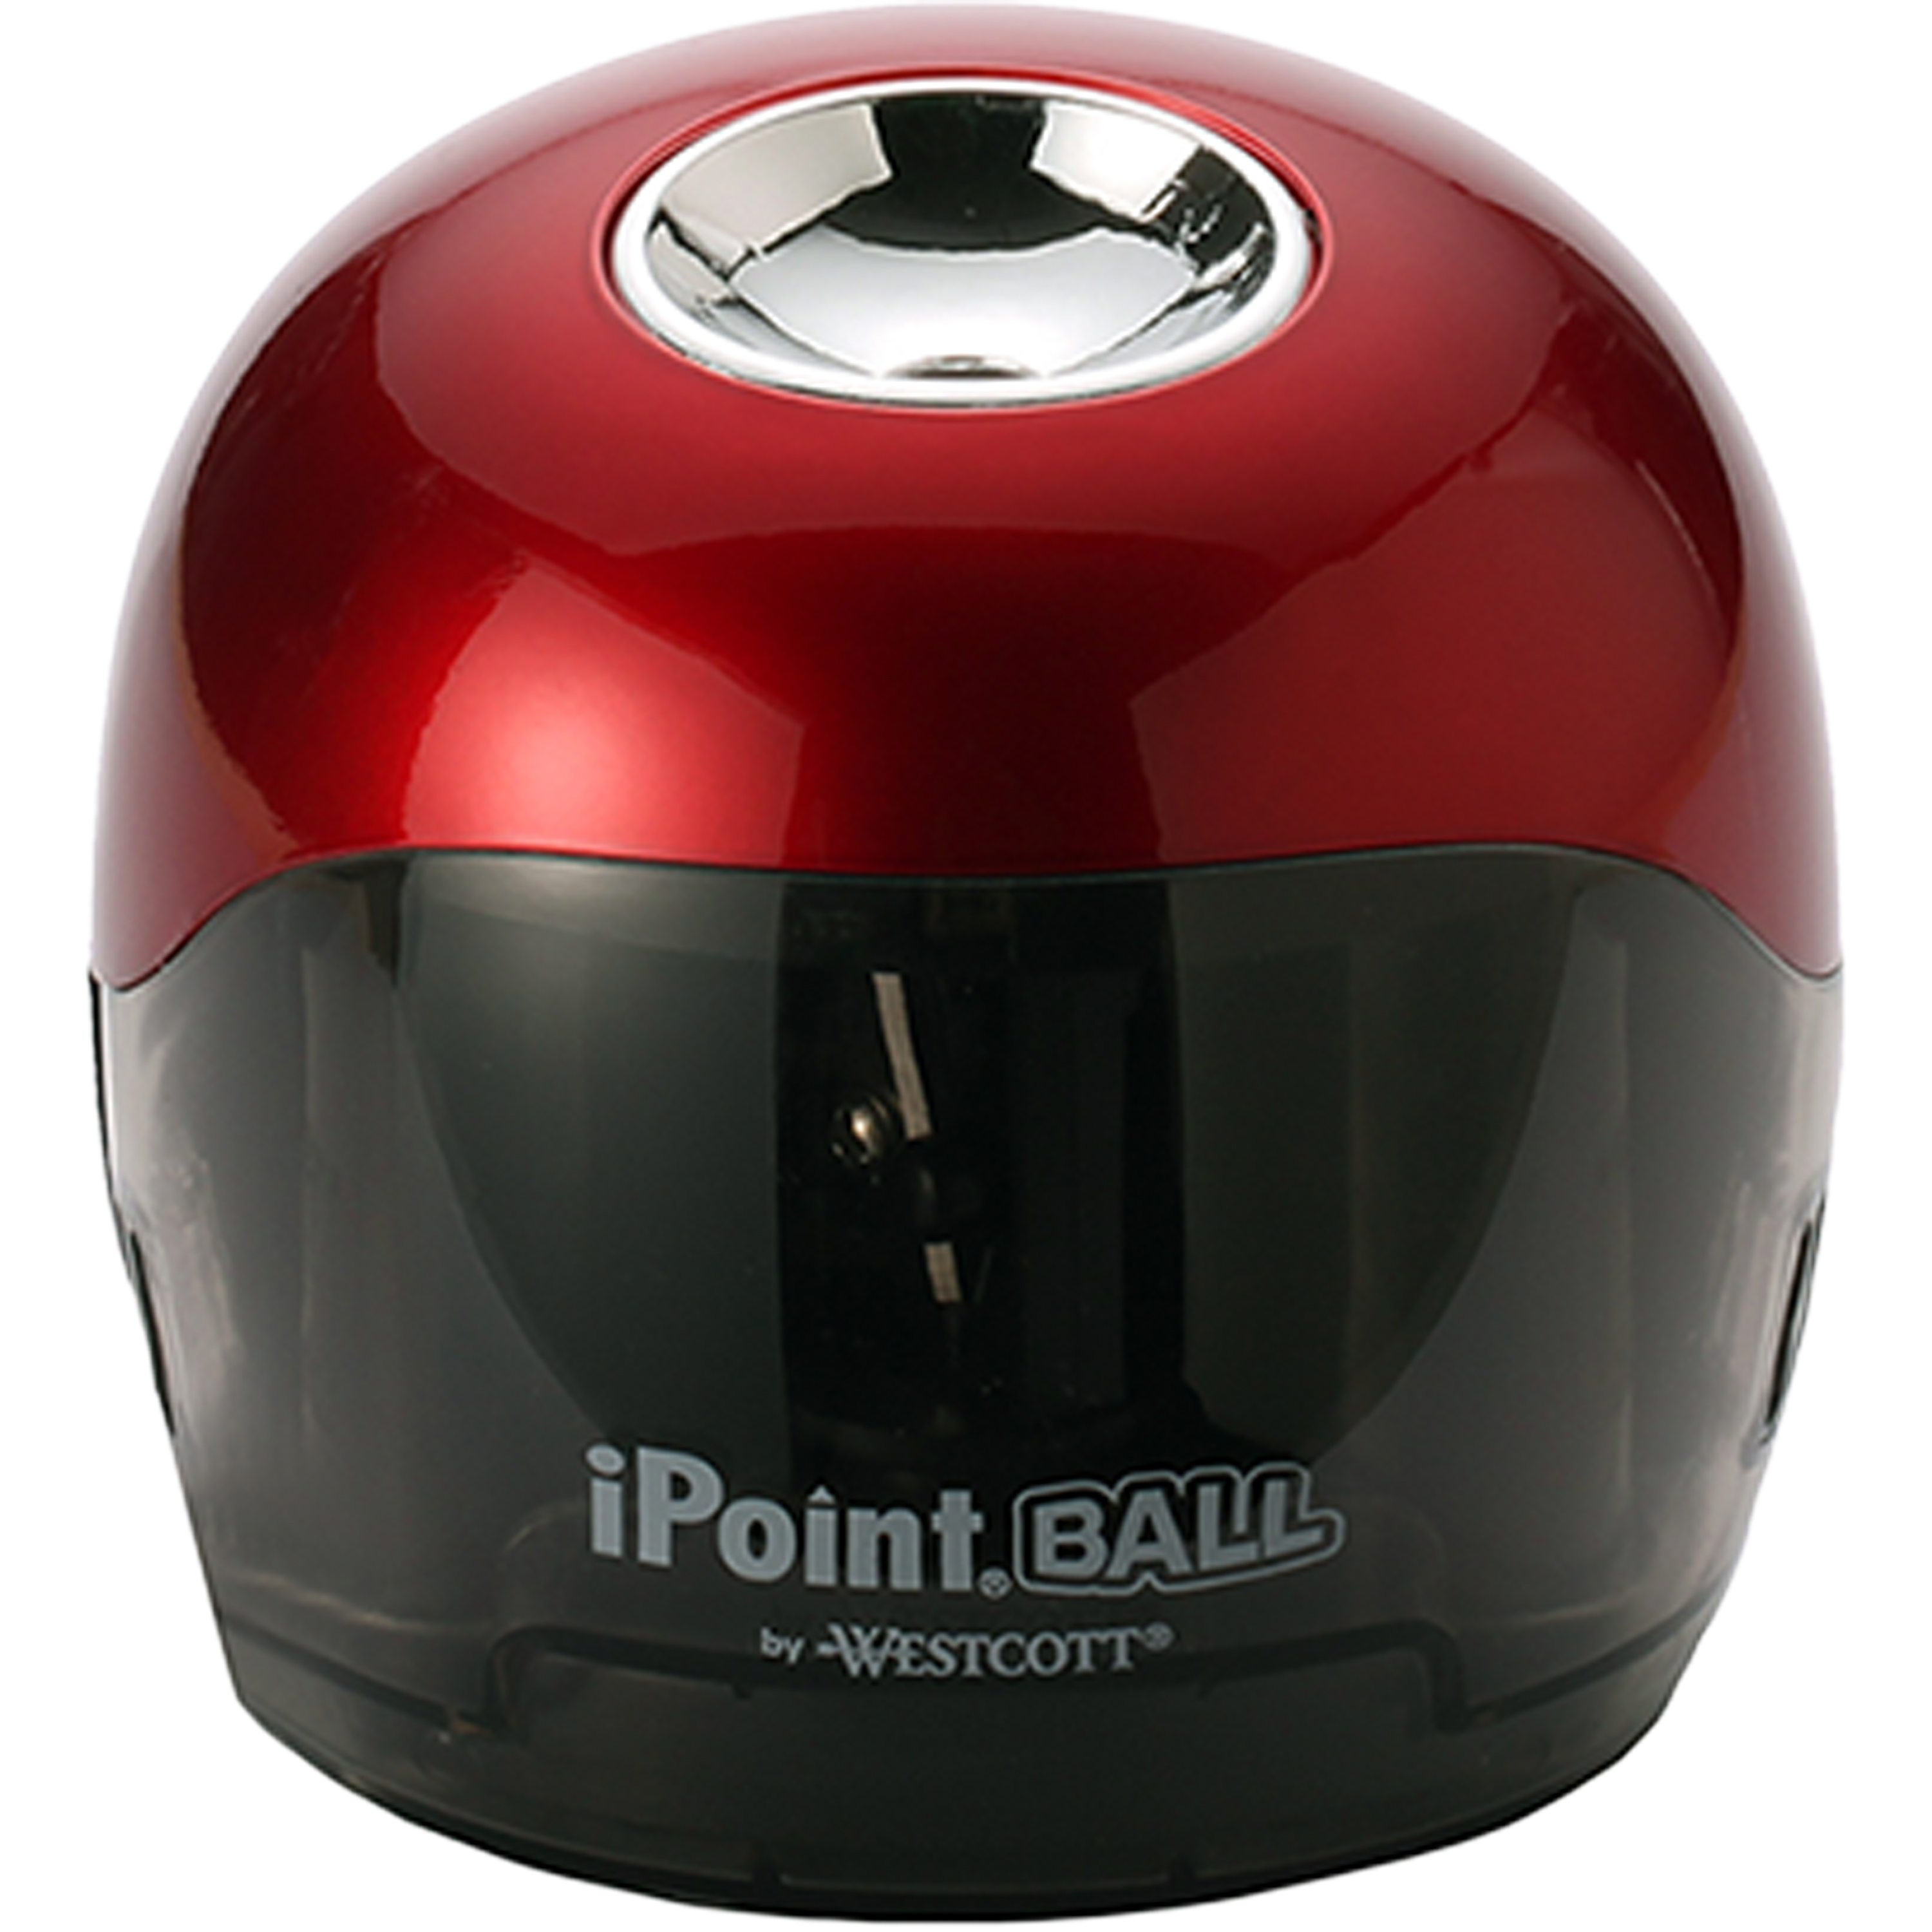 Westcott New iPoint Ball Battery Sharpener, for Office, 3w x 3d x 3 1/3h, Red, 1-Count - image 1 of 10